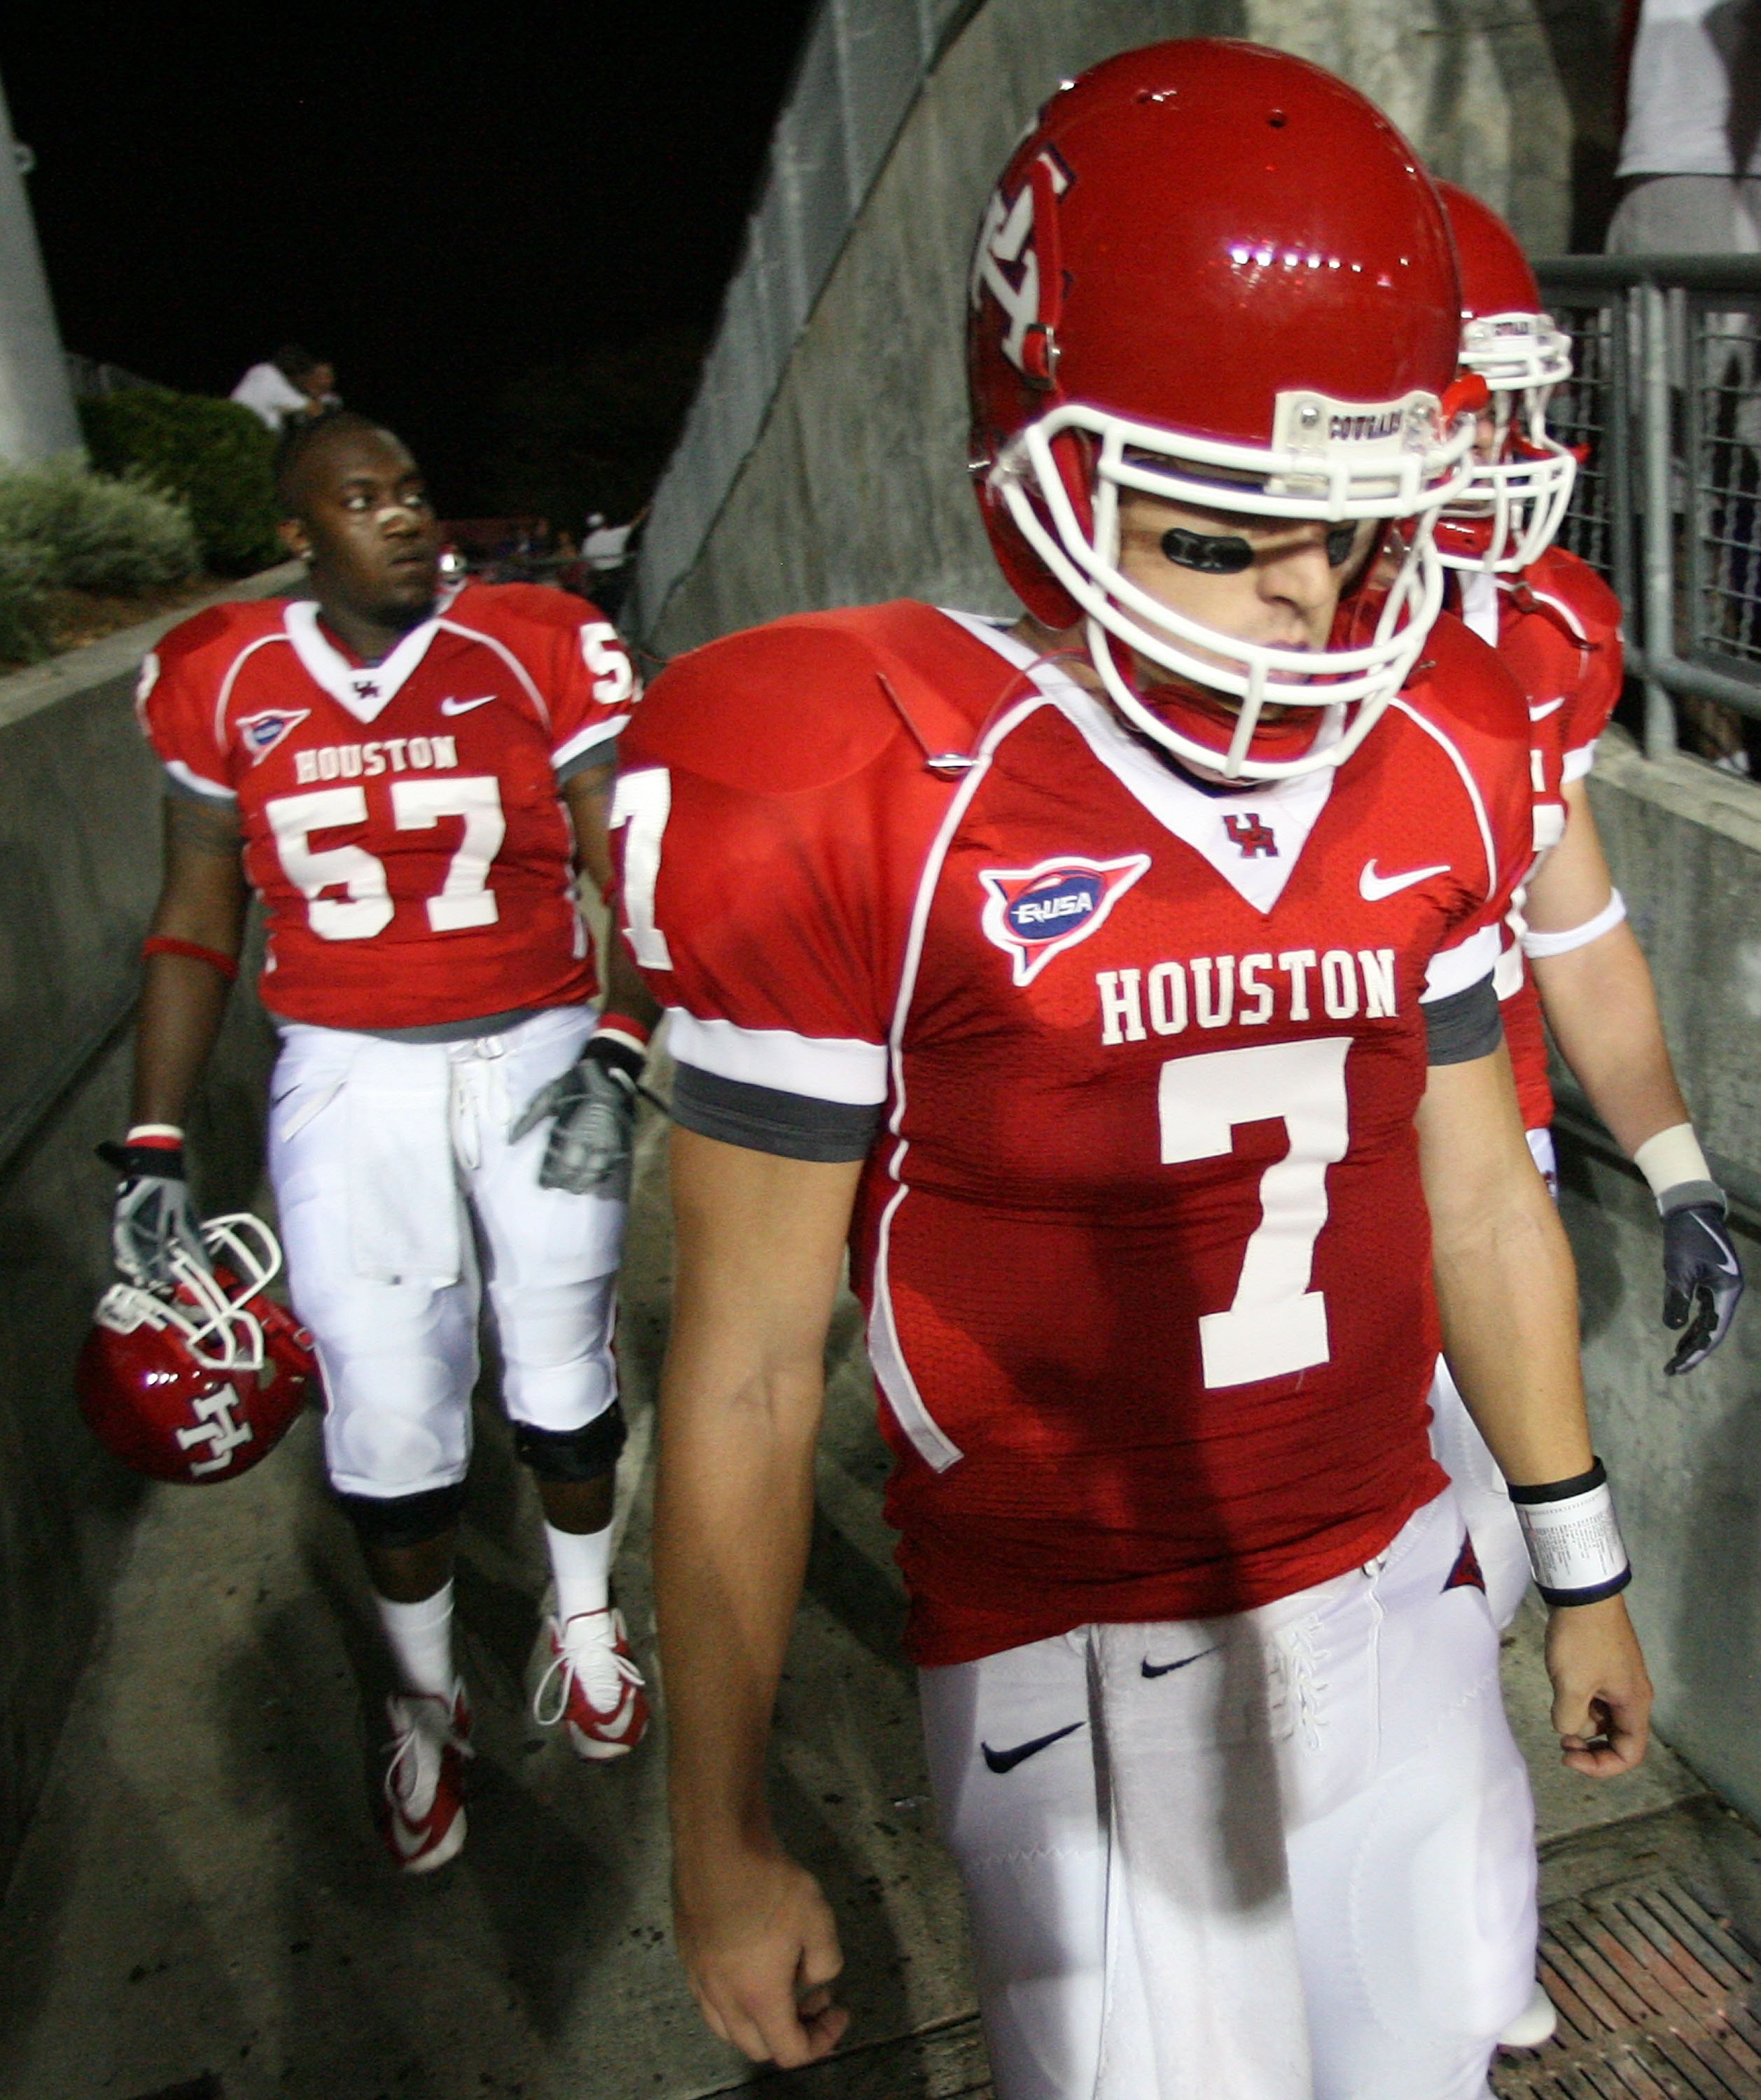 HOUSTON - SEPTEMBER 26:  Quarterback Case Keenum #7 of the Houston Cougars walks on the files before playing against the Texas Tech Red Raiders at Robertson Stadium on September 26, 2009 in Houston, Texas.  (Photo by Thomas B. Shea/Getty Images)